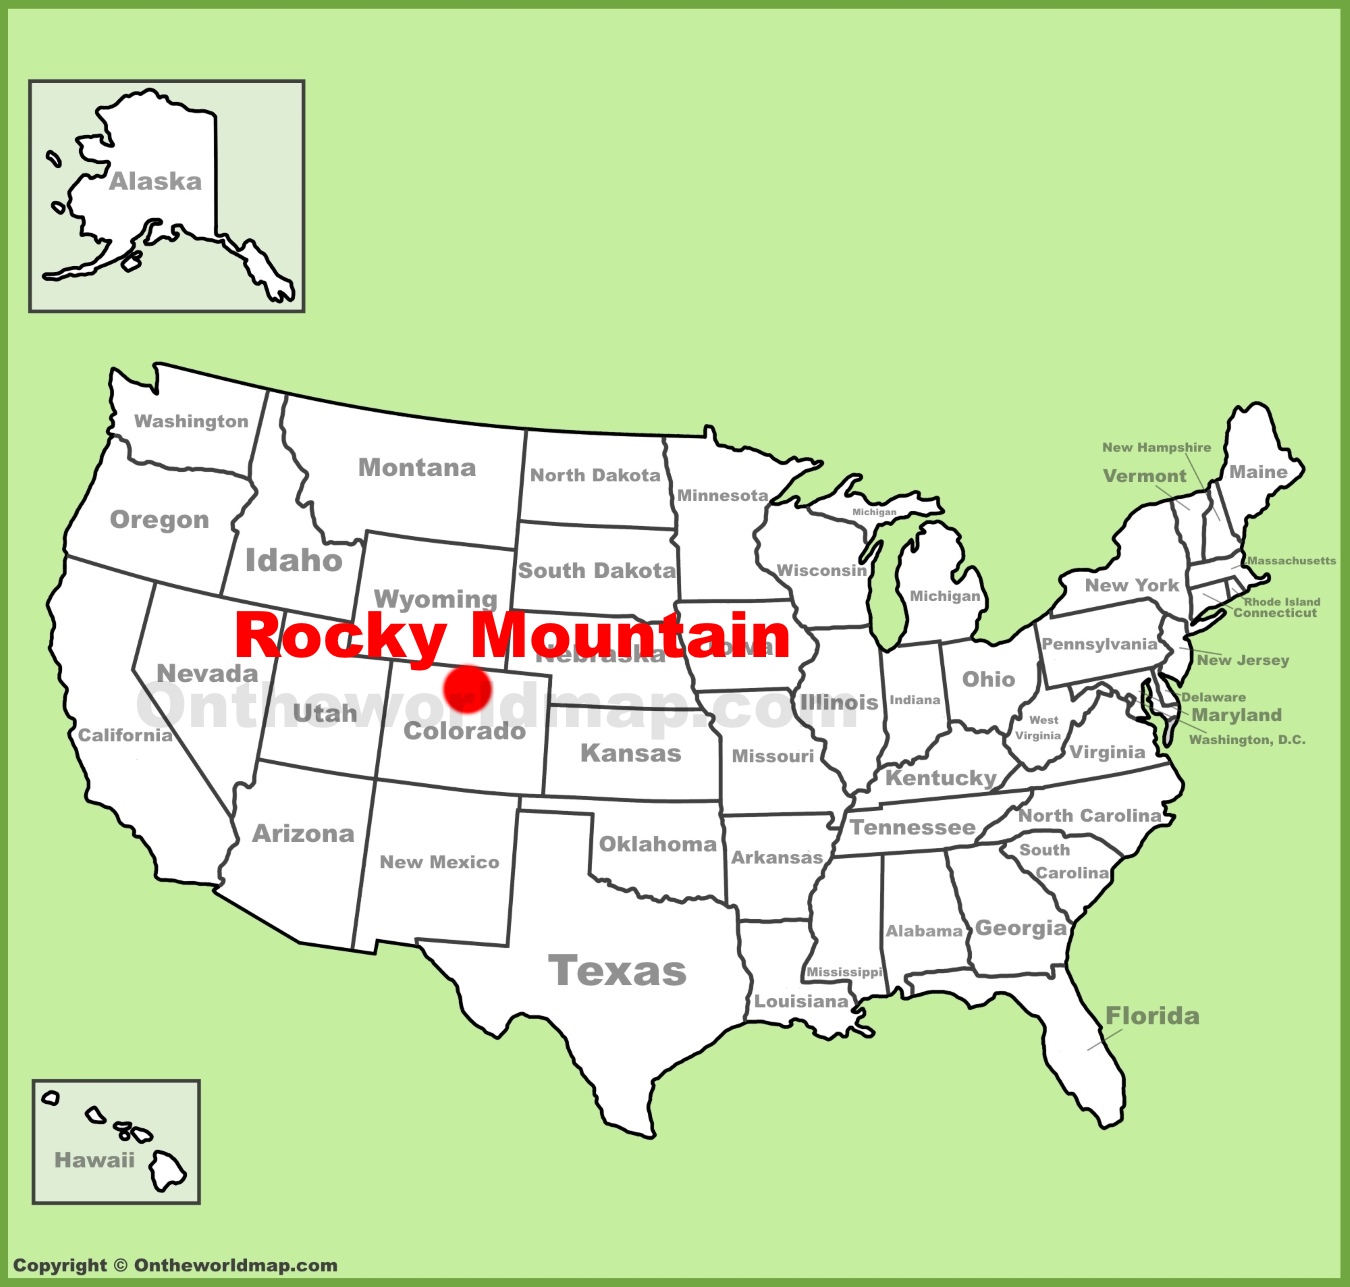 Rocky Mountain National Park Location On The U S Map